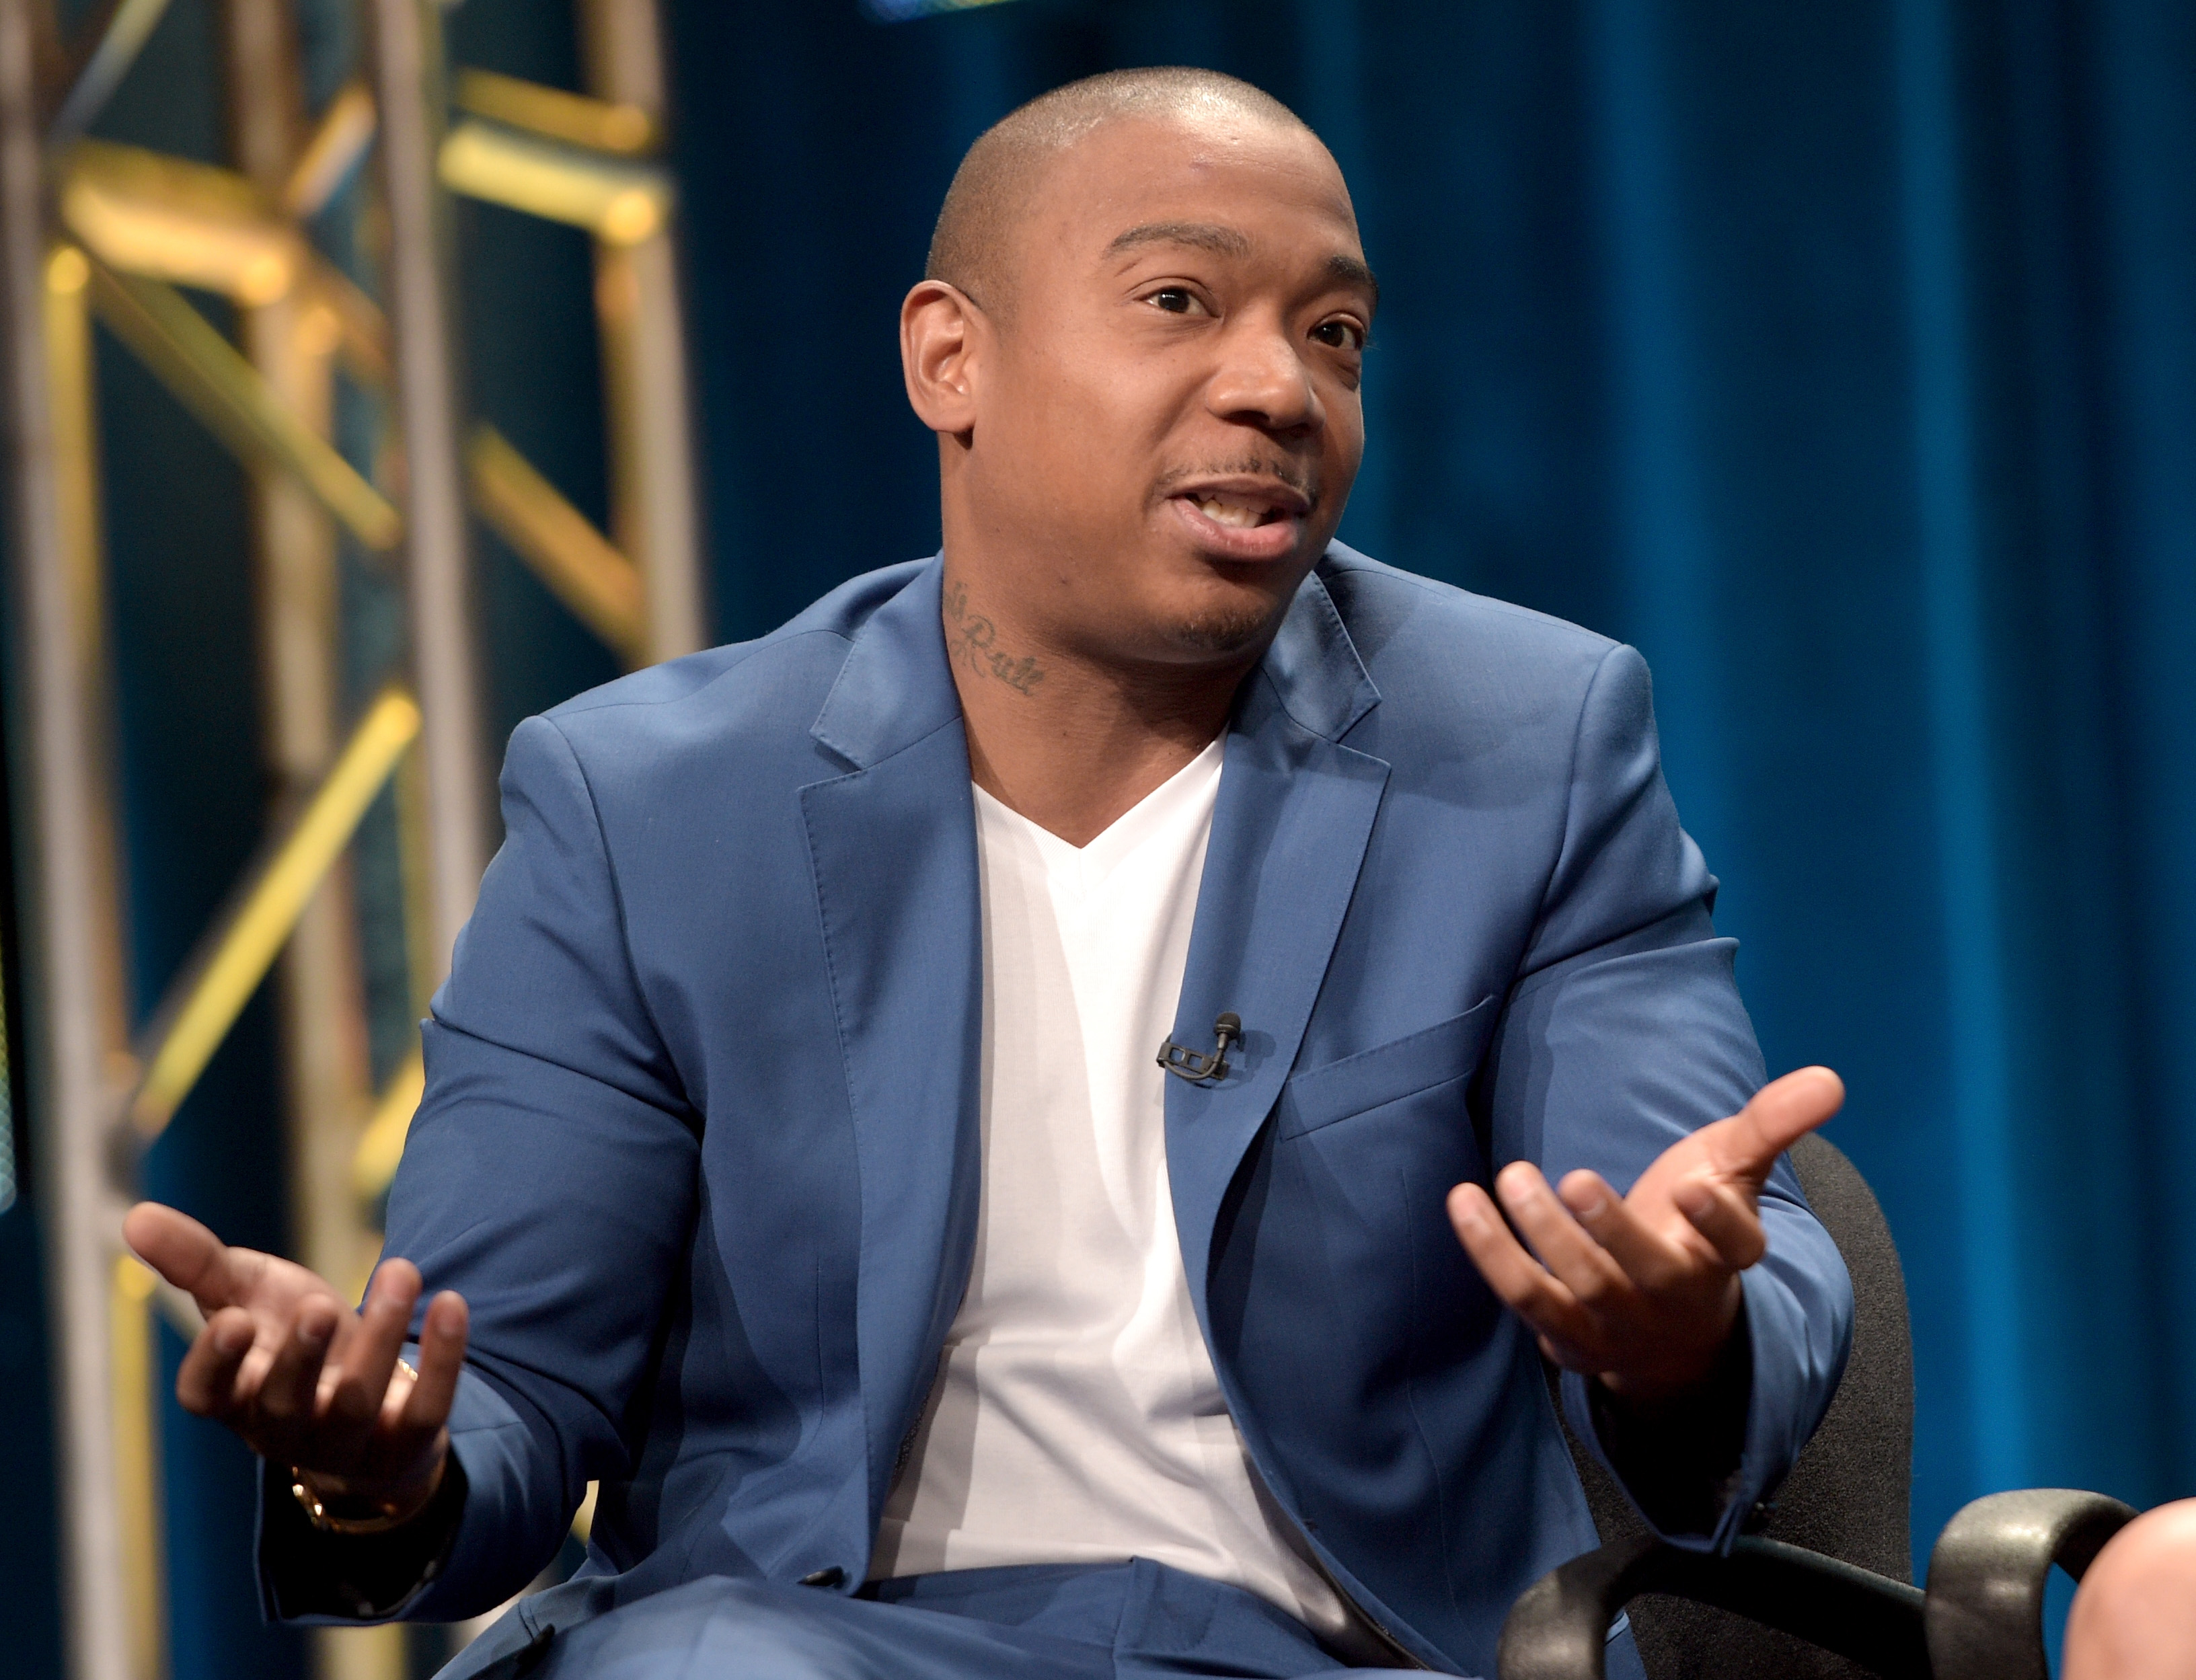 Ja Rule, co-owner of the Fyre Festival, speaks onstage during the 'Follow The Rules' panel at the Viacom TCA Presentation at The Beverly Hilton Hotel on July 29, 2015 in Beverly Hills, California. (Jason Kempin&mdash;Getty Images for Viacom)